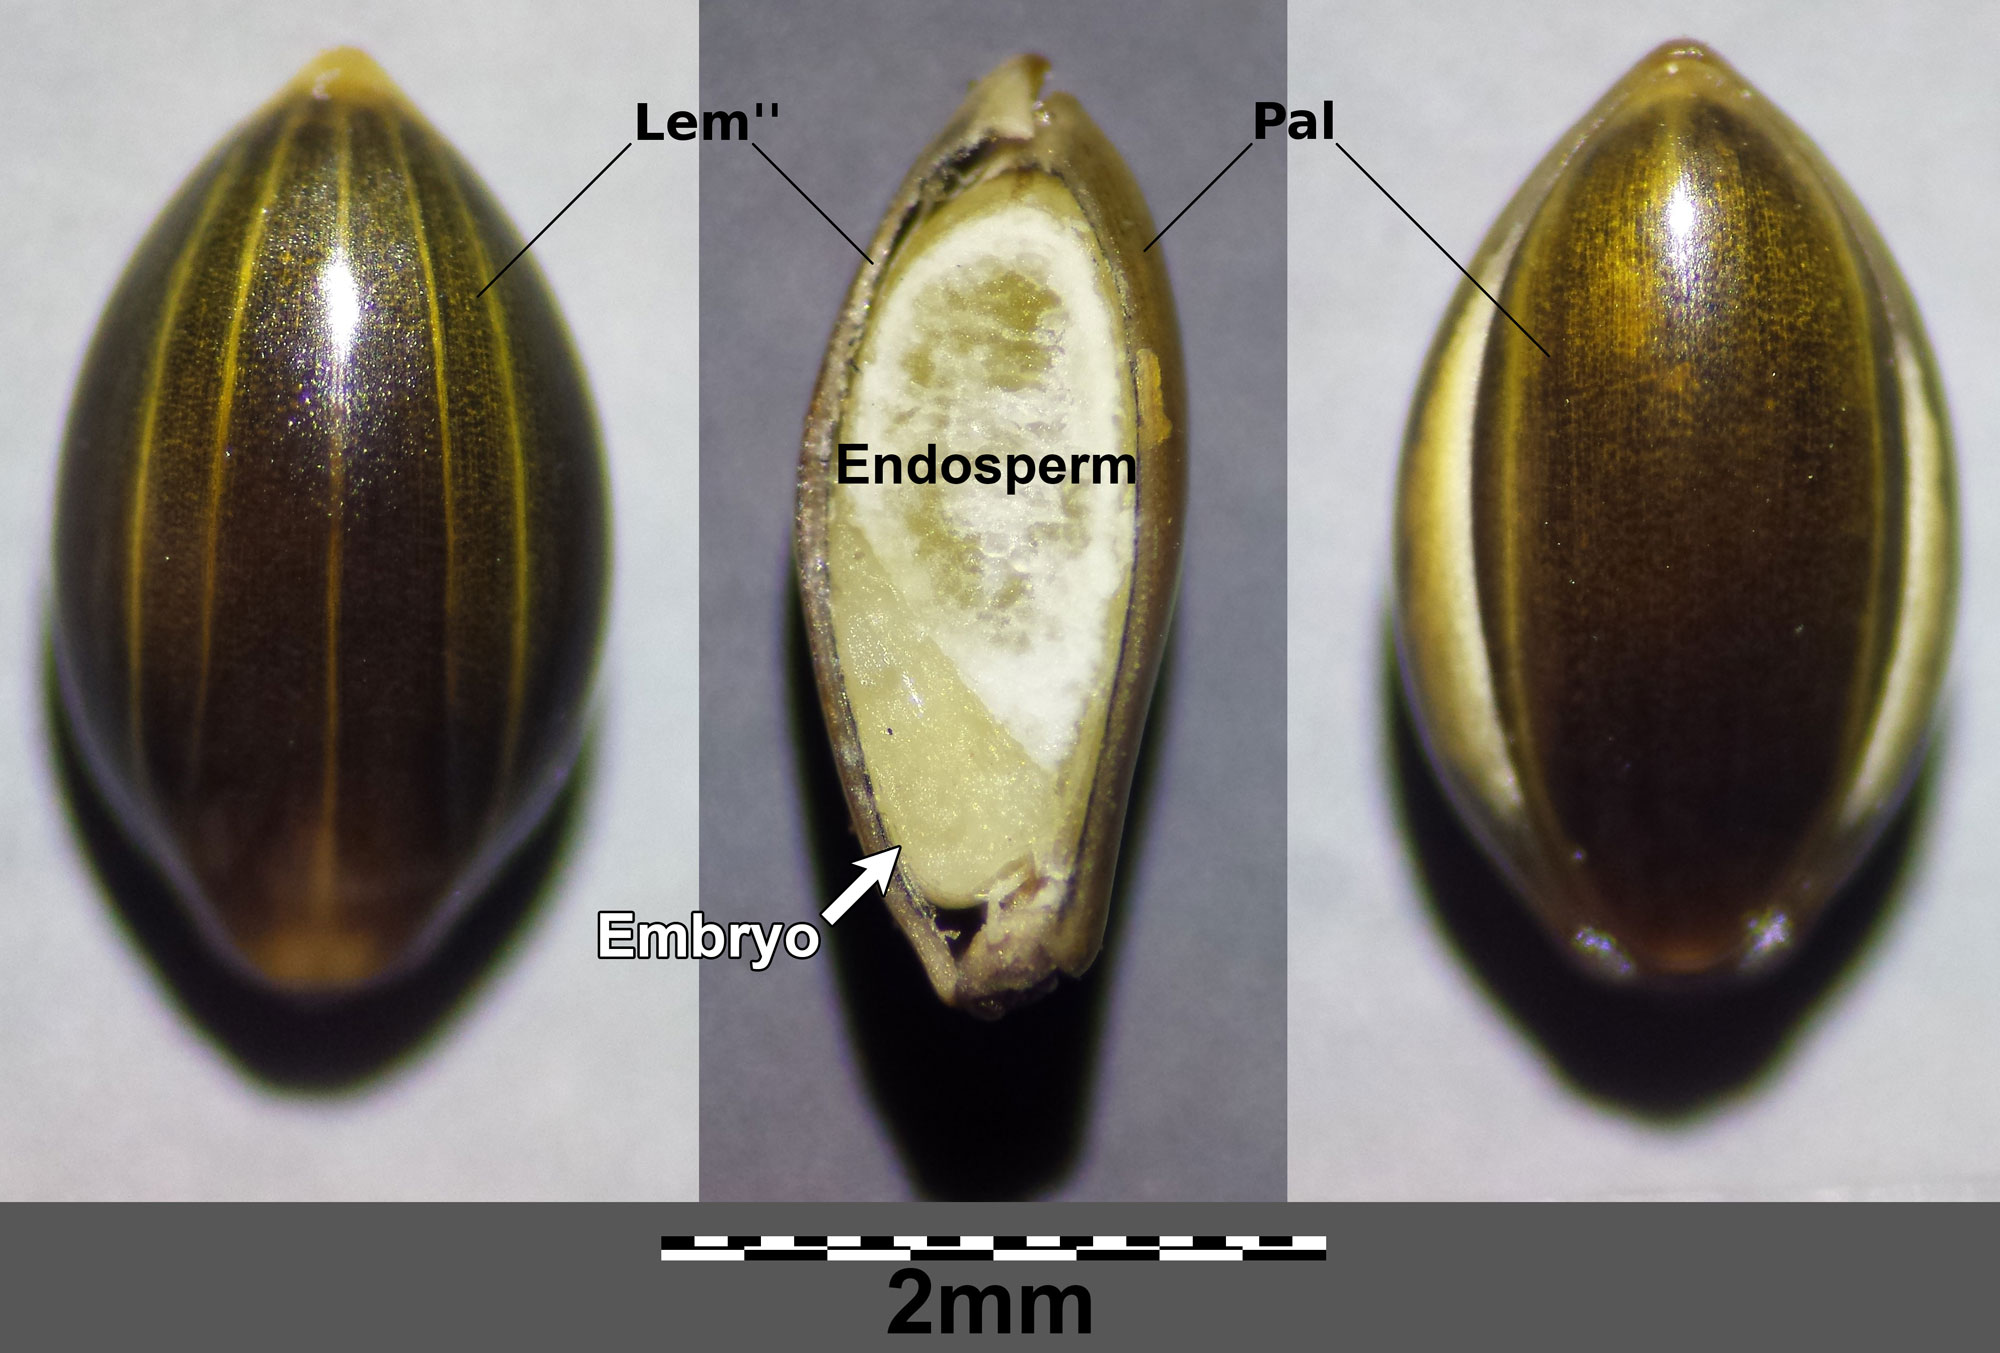 Photographs of a caryopsis of broomcorn millet in three views. The left view shows the side covered by the lemma, the right view shows the side covered by the palea, and the middle view shows a longitudinal section where the embryo and endosperm can be seen. Lemma and palea are labeled on the images, and the endosperm and embryo are labeled in the center image.